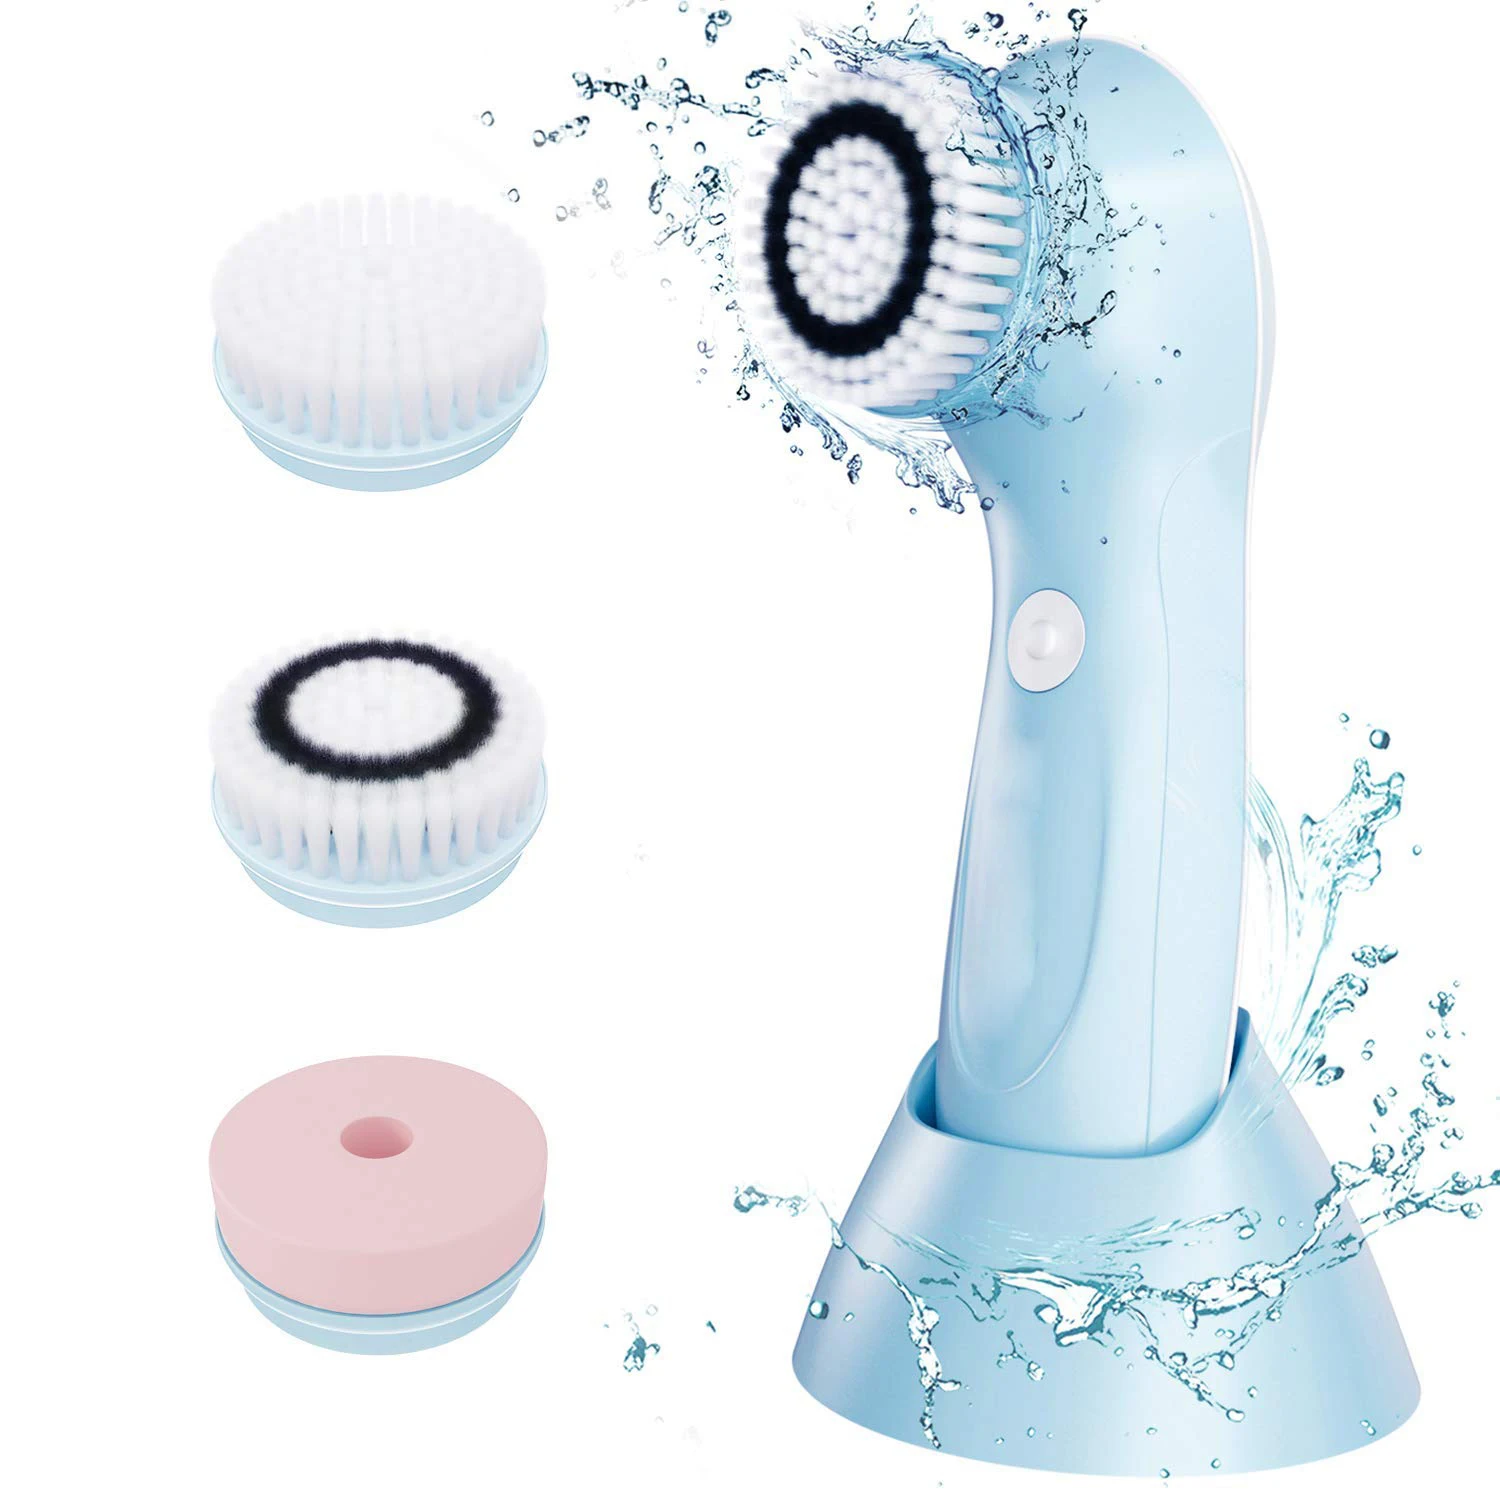 

Head replacement cleanser rotary profesional face rotation cleaning facial cleansing brush with 3 heads, Pink/blue